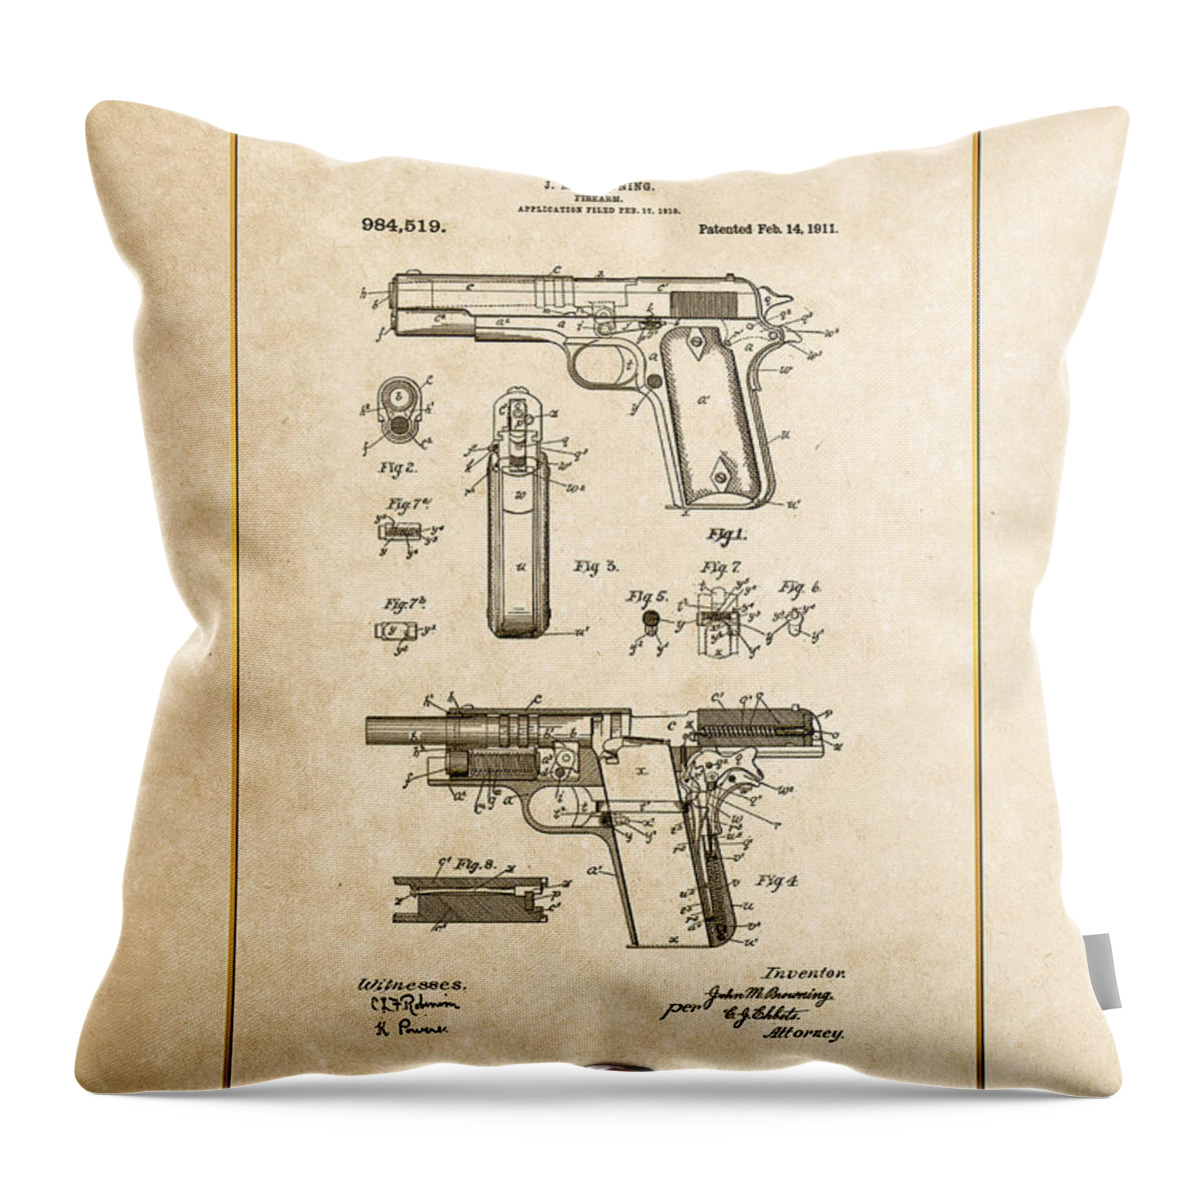 C7 Vintage Patents Weapons And Firearms Throw Pillow featuring the digital art Colt 1911 by John M. Browning - Vintage Patent Document by Serge Averbukh